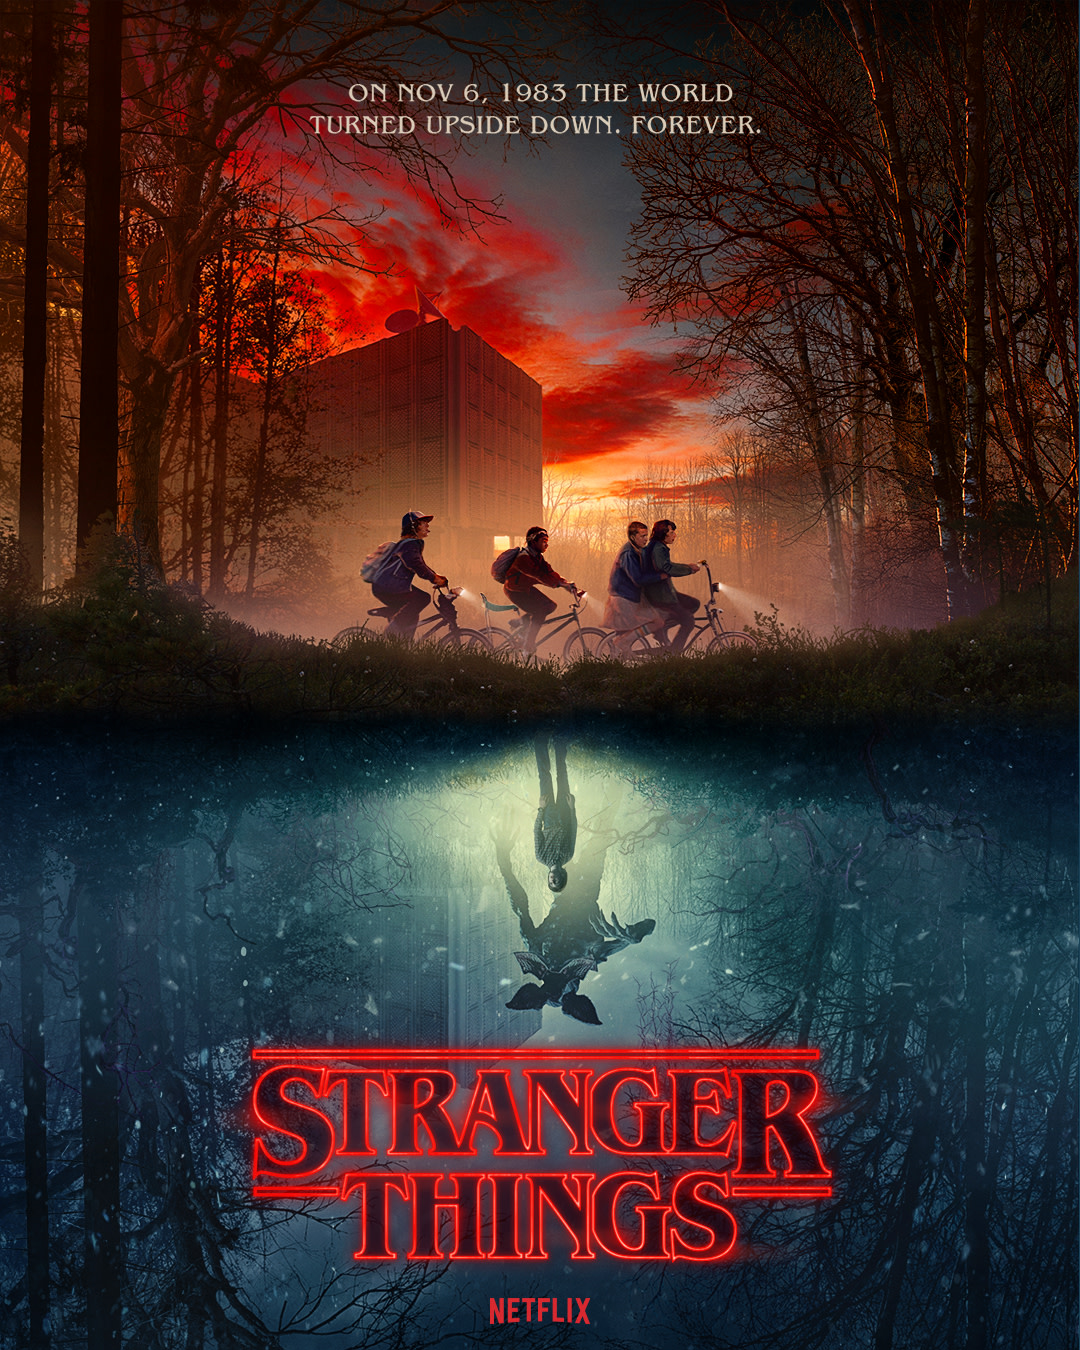 Stranger Things' Day 2021: Our Complete Preview Guide - About Netflix